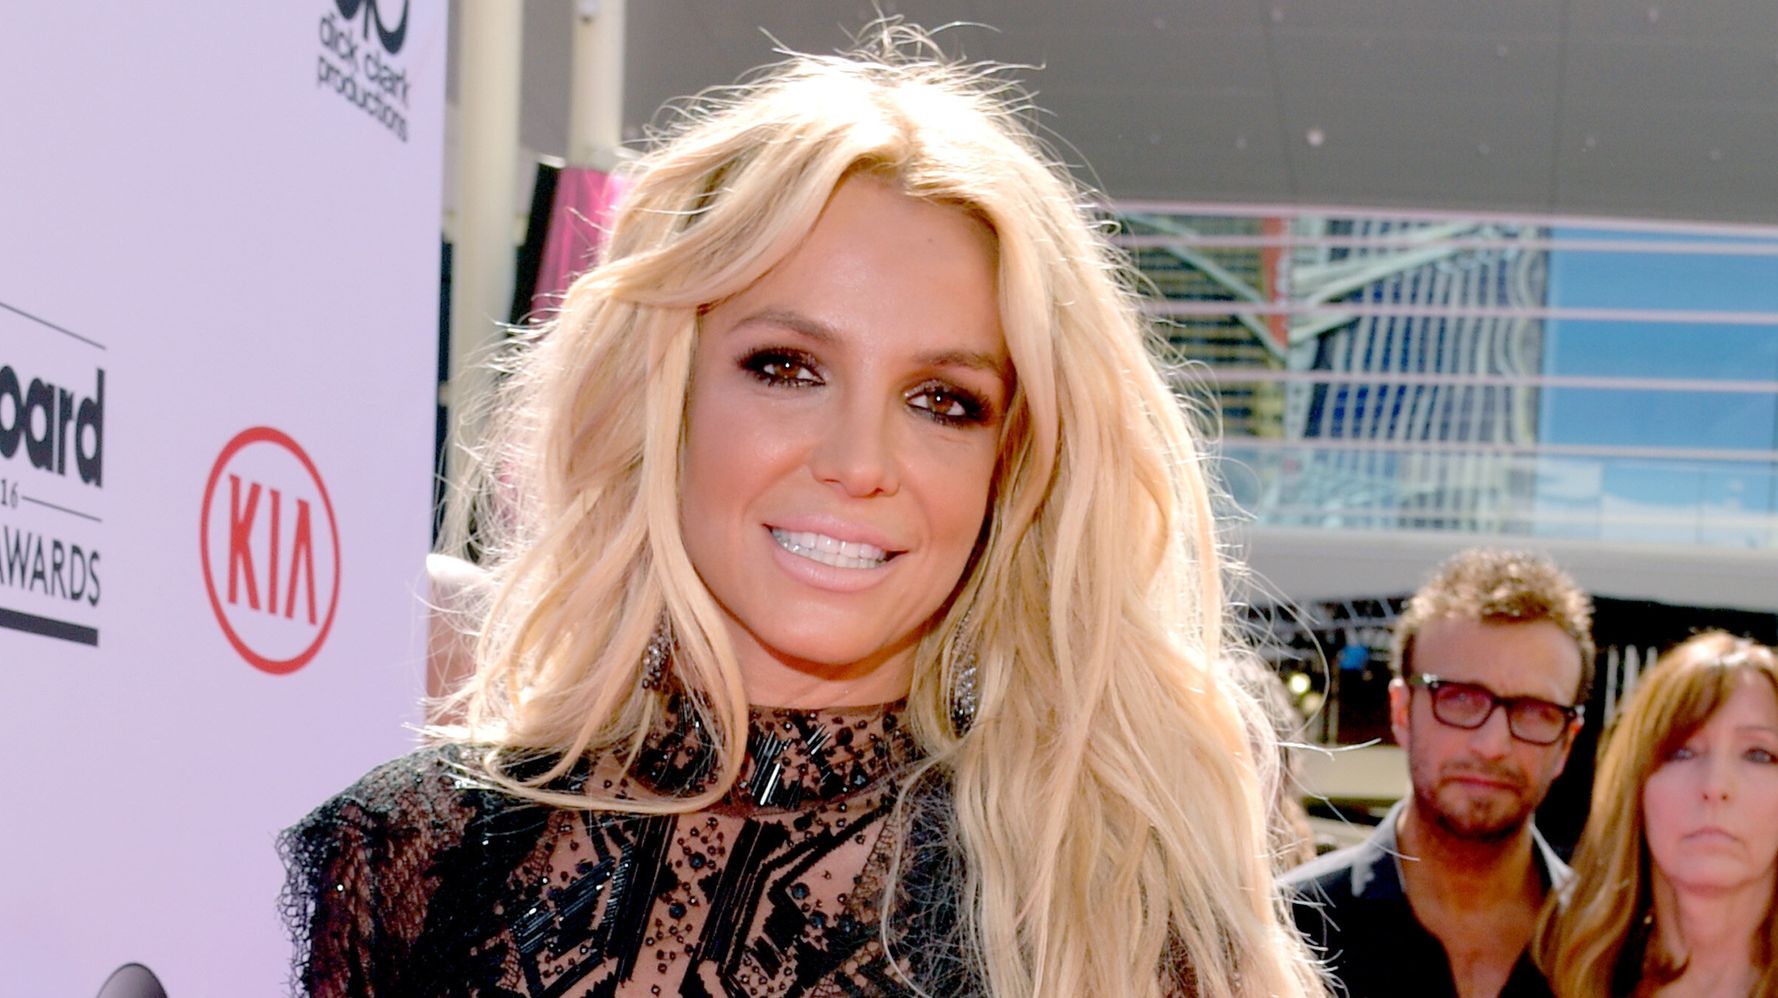 Britney Spears Is Far From The Only Person Locked In A Conservatorship Nightmare